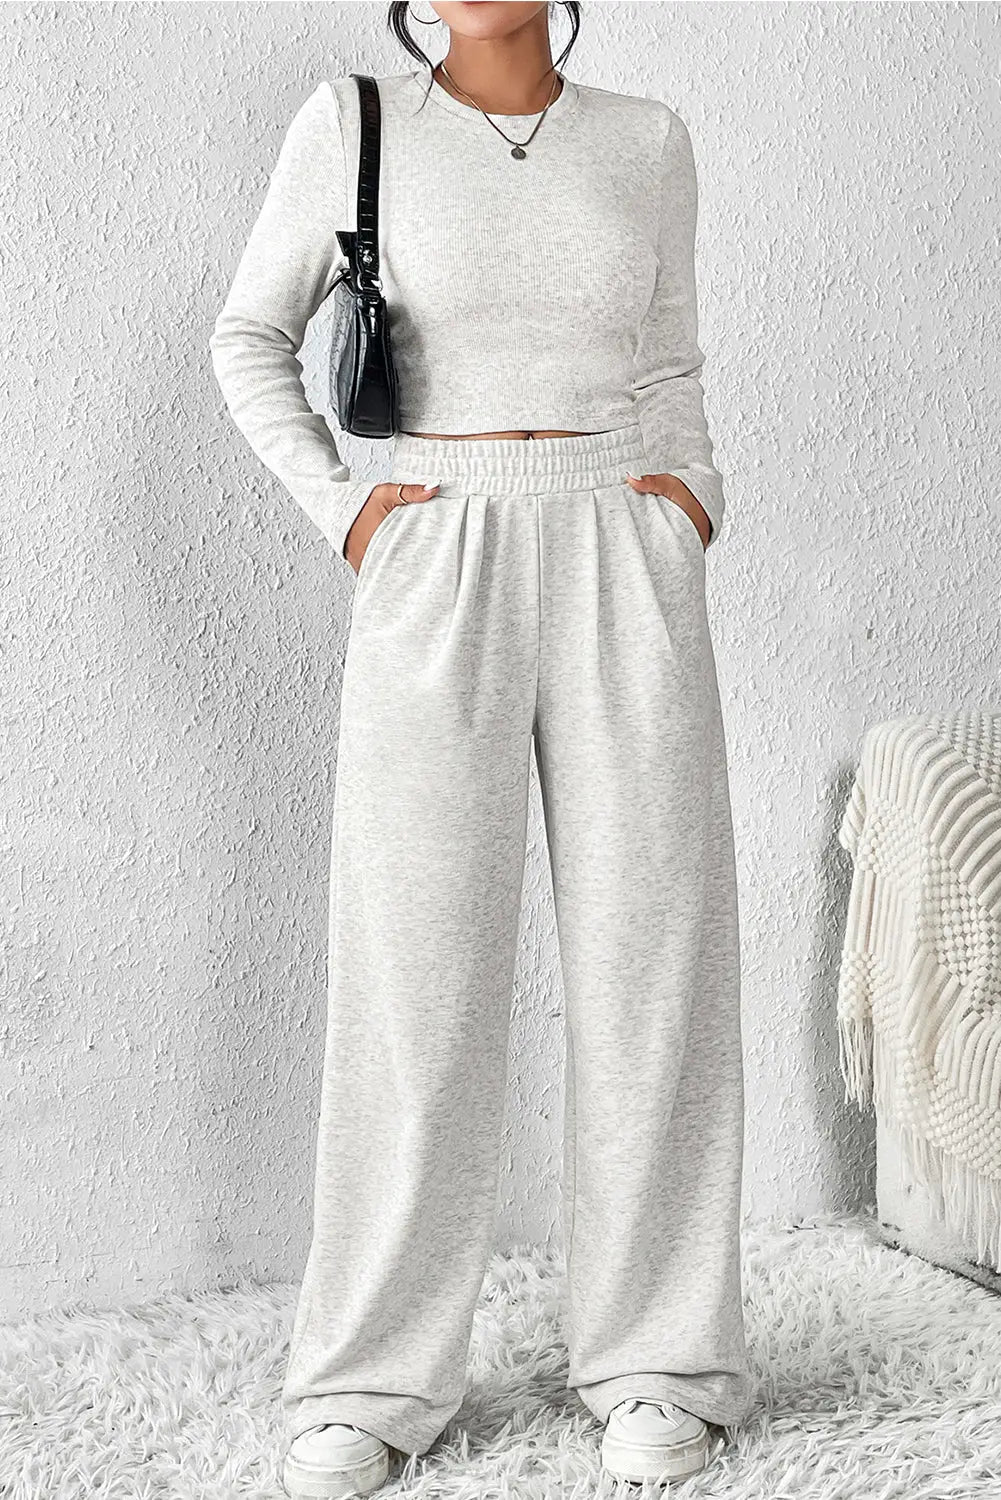 Beige crop top and wide leg pants two piece set - s 65% polyester + 35% cotton loungewear